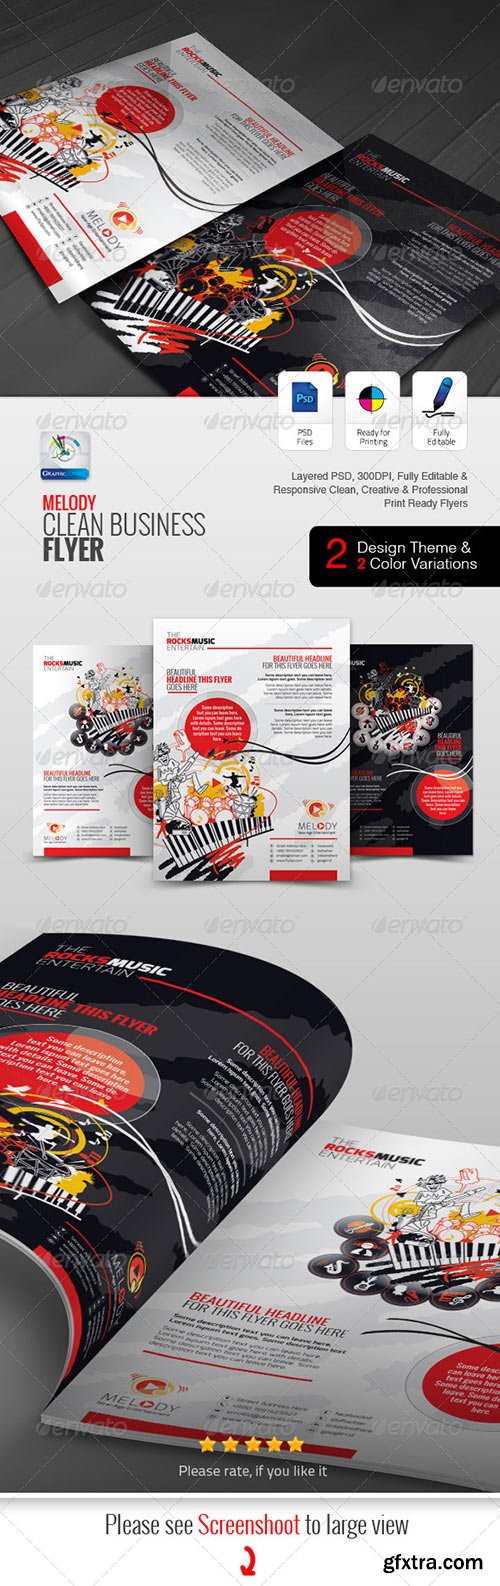 Graphicriver - Melody Business Flyer/Ad 5820145